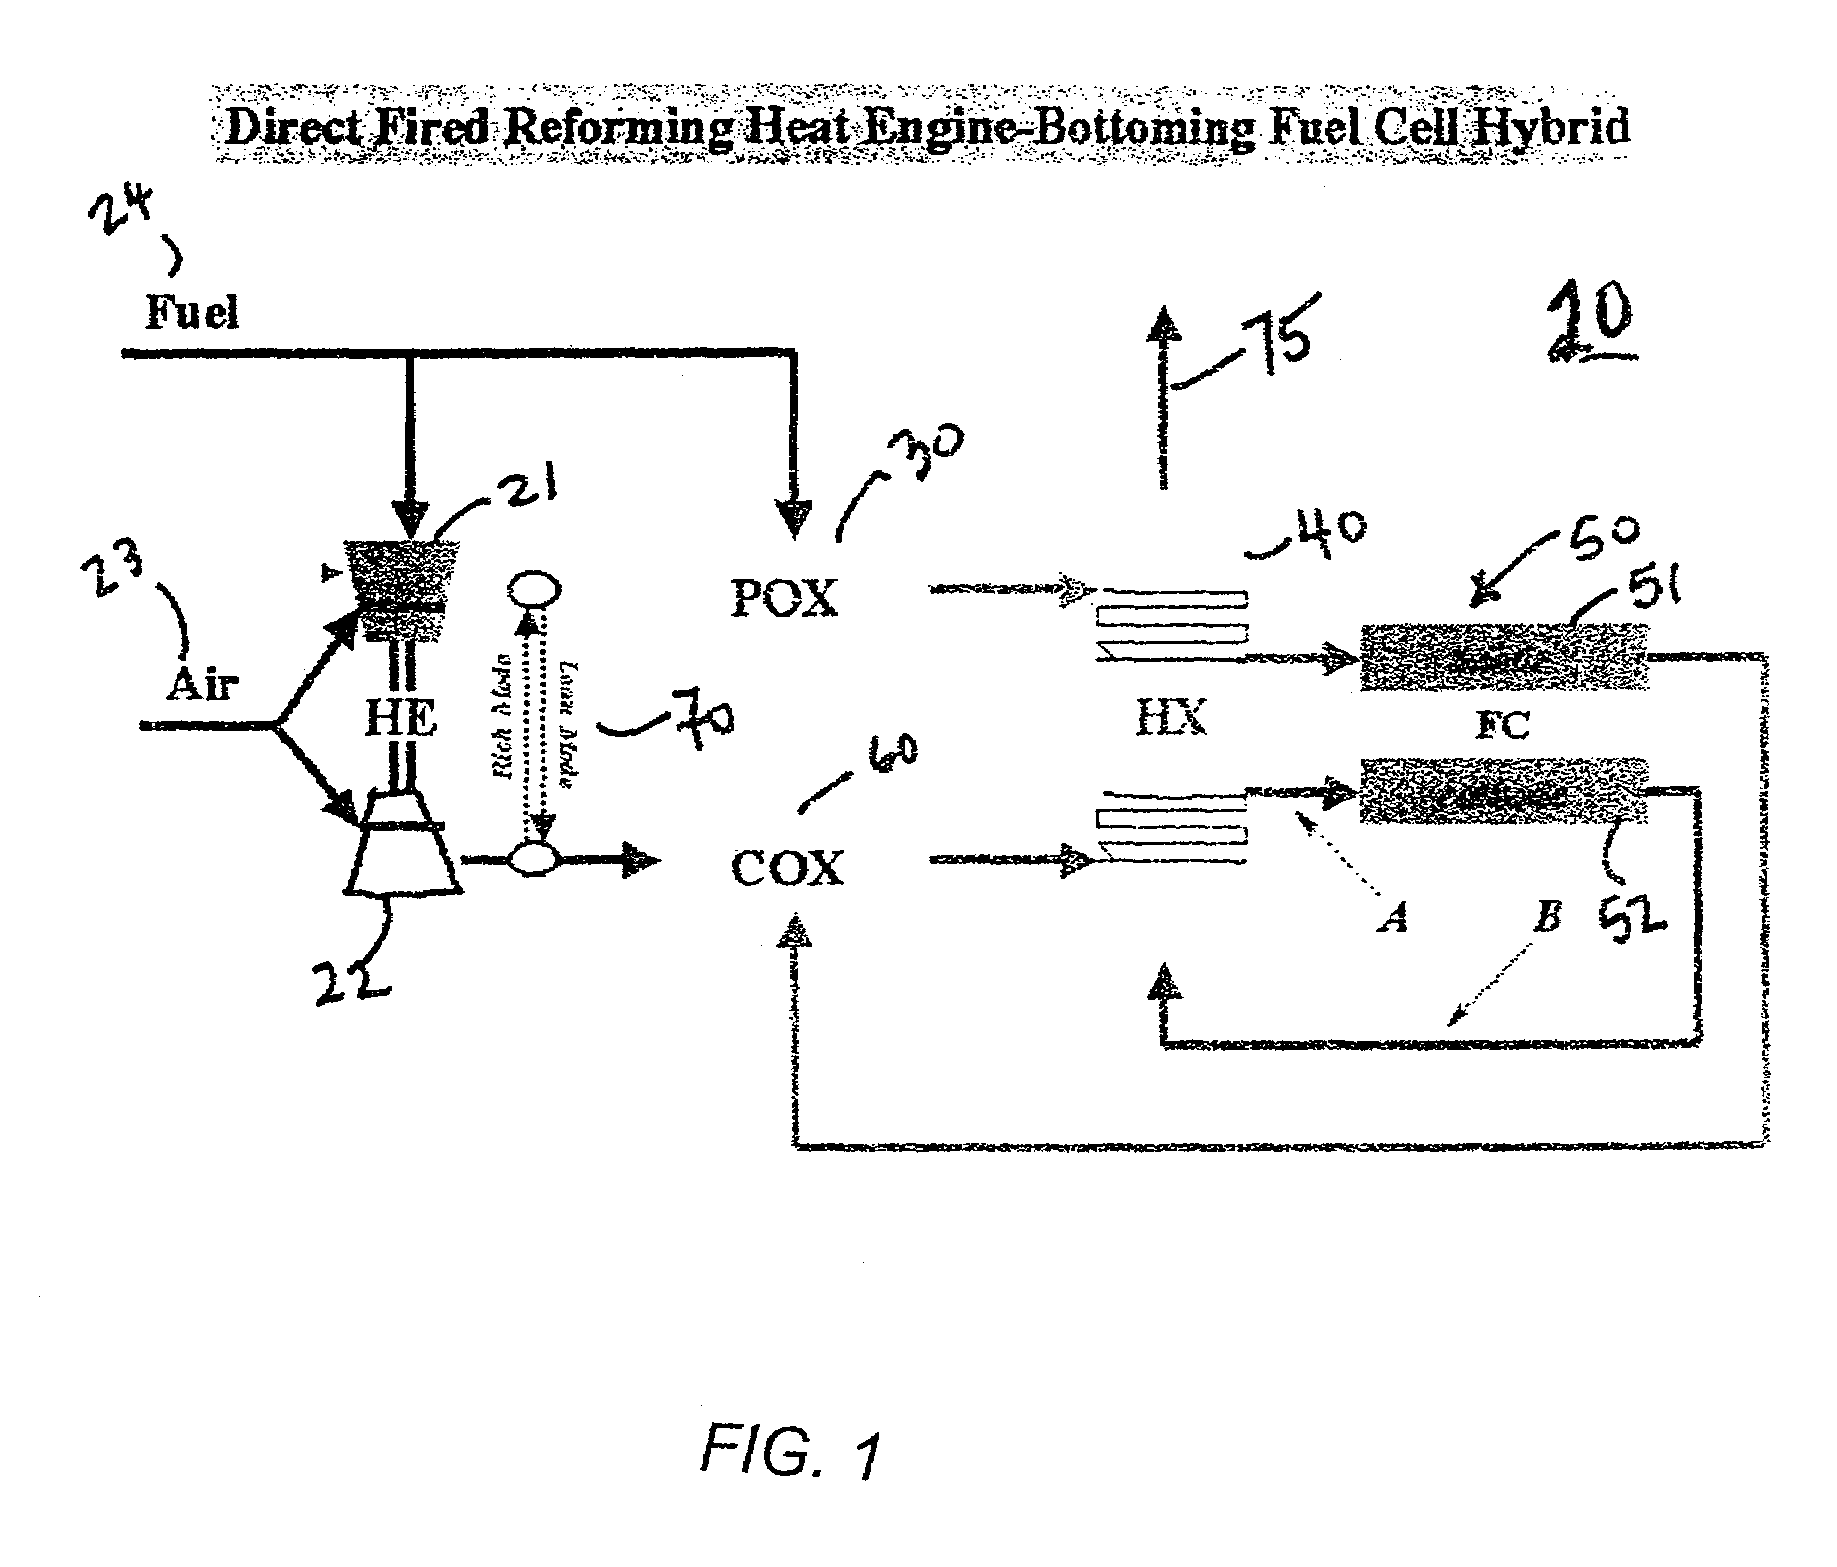 Direct fired reciprocating engine and bottoming high temperature fuel cell hybrid